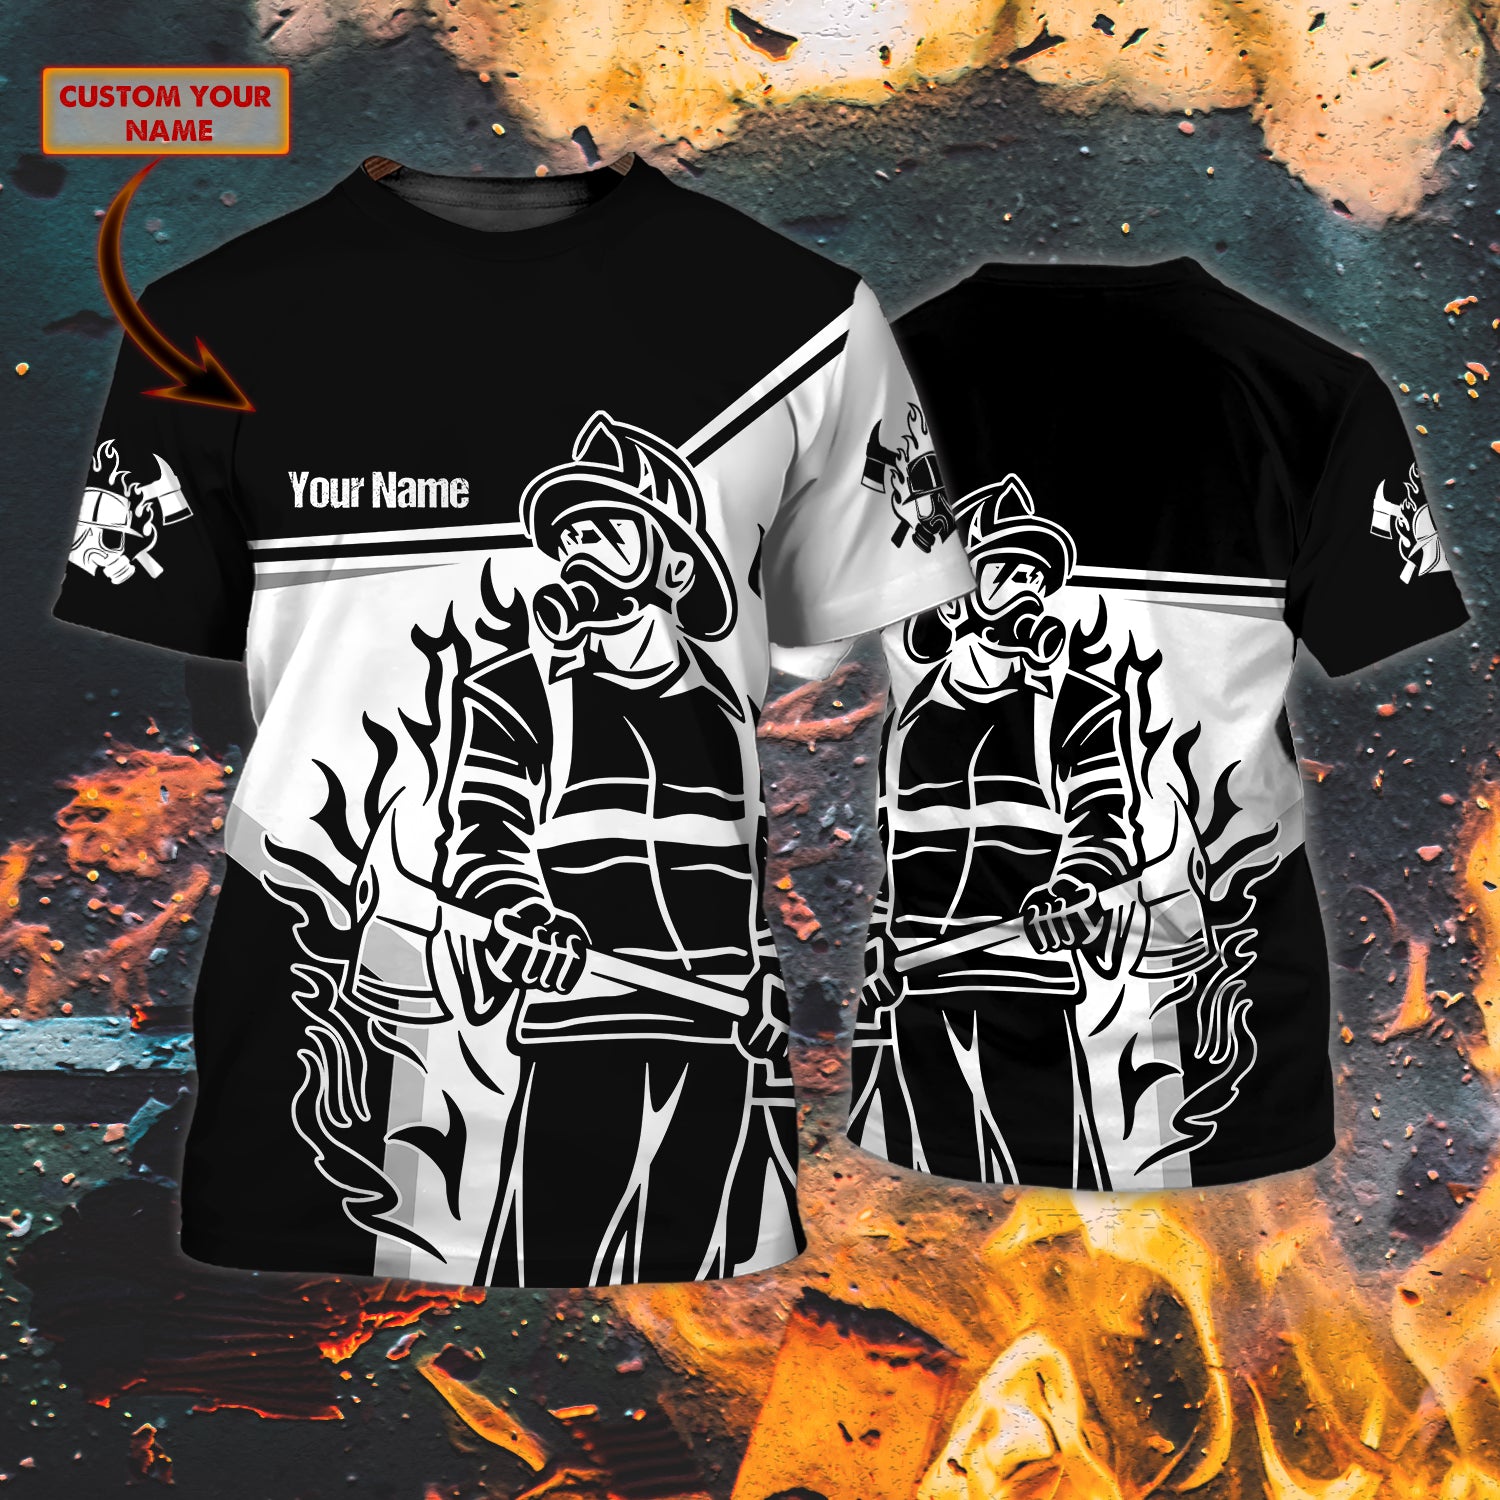 Firefighter - Personalized Name 3D Tshirt 01 - H98